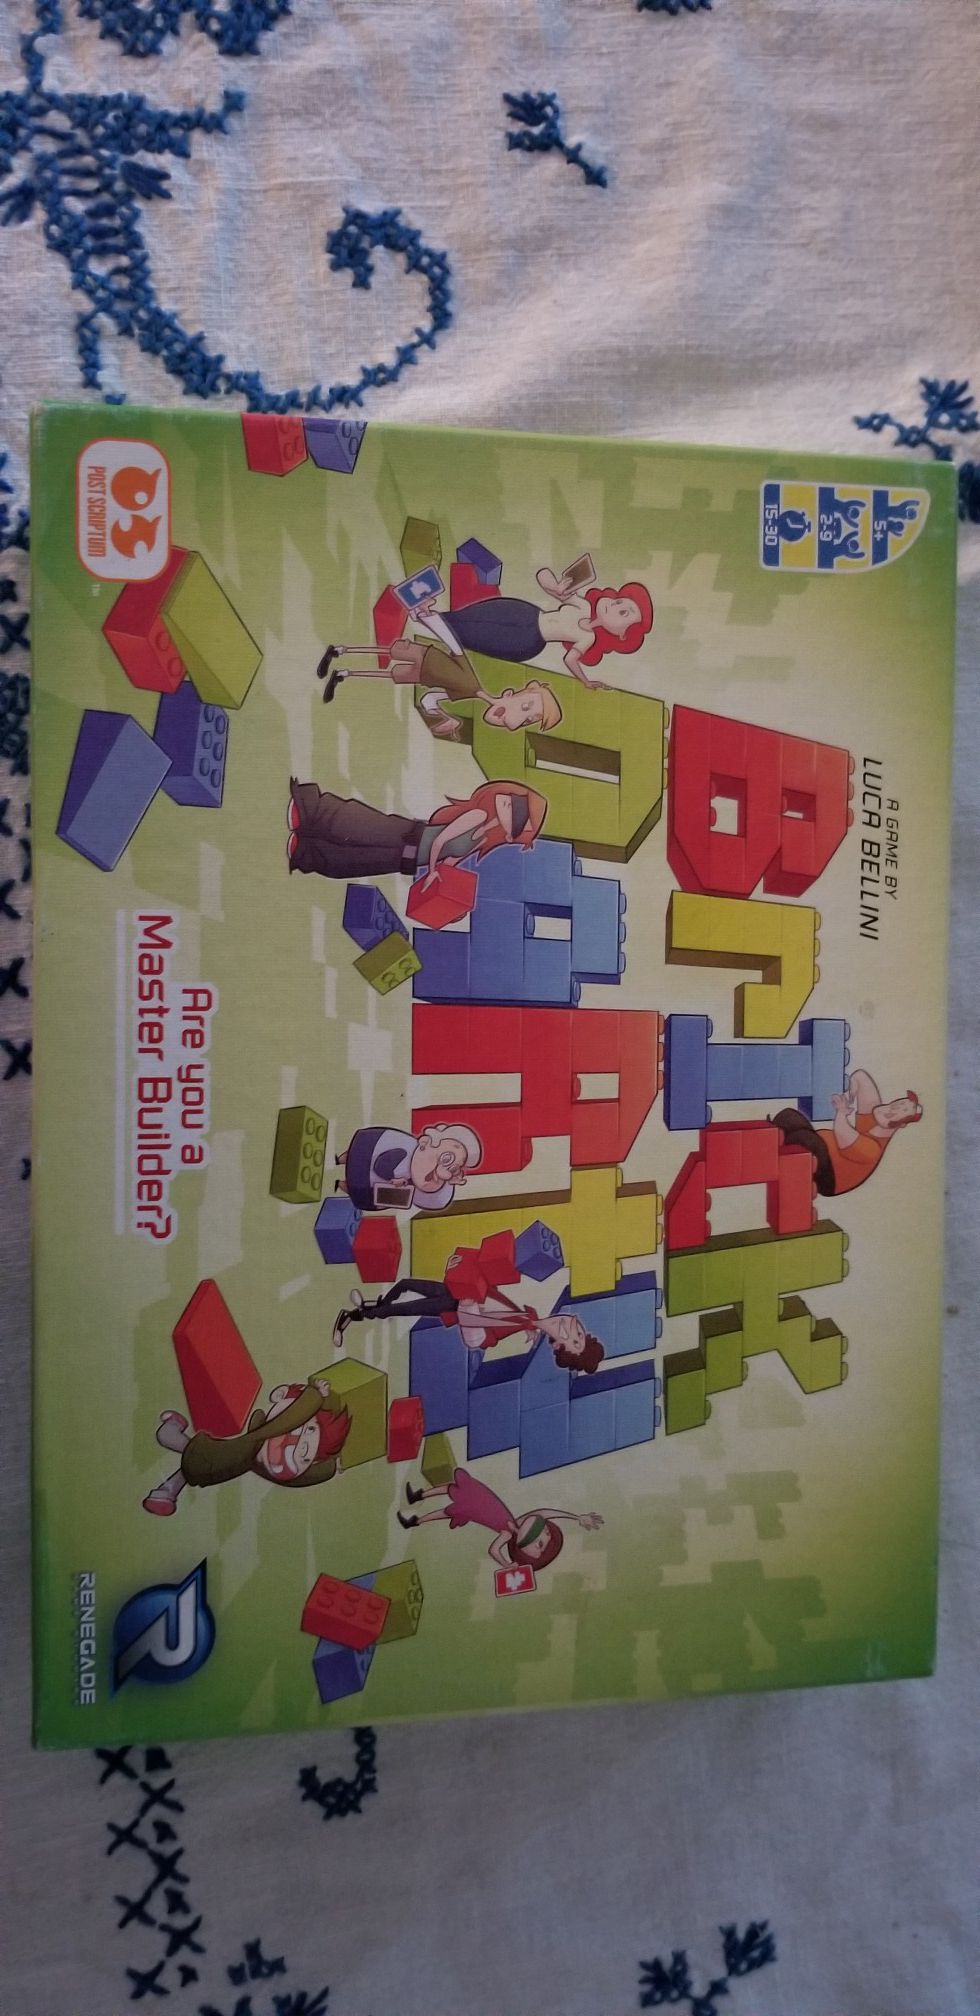 Brick party board game